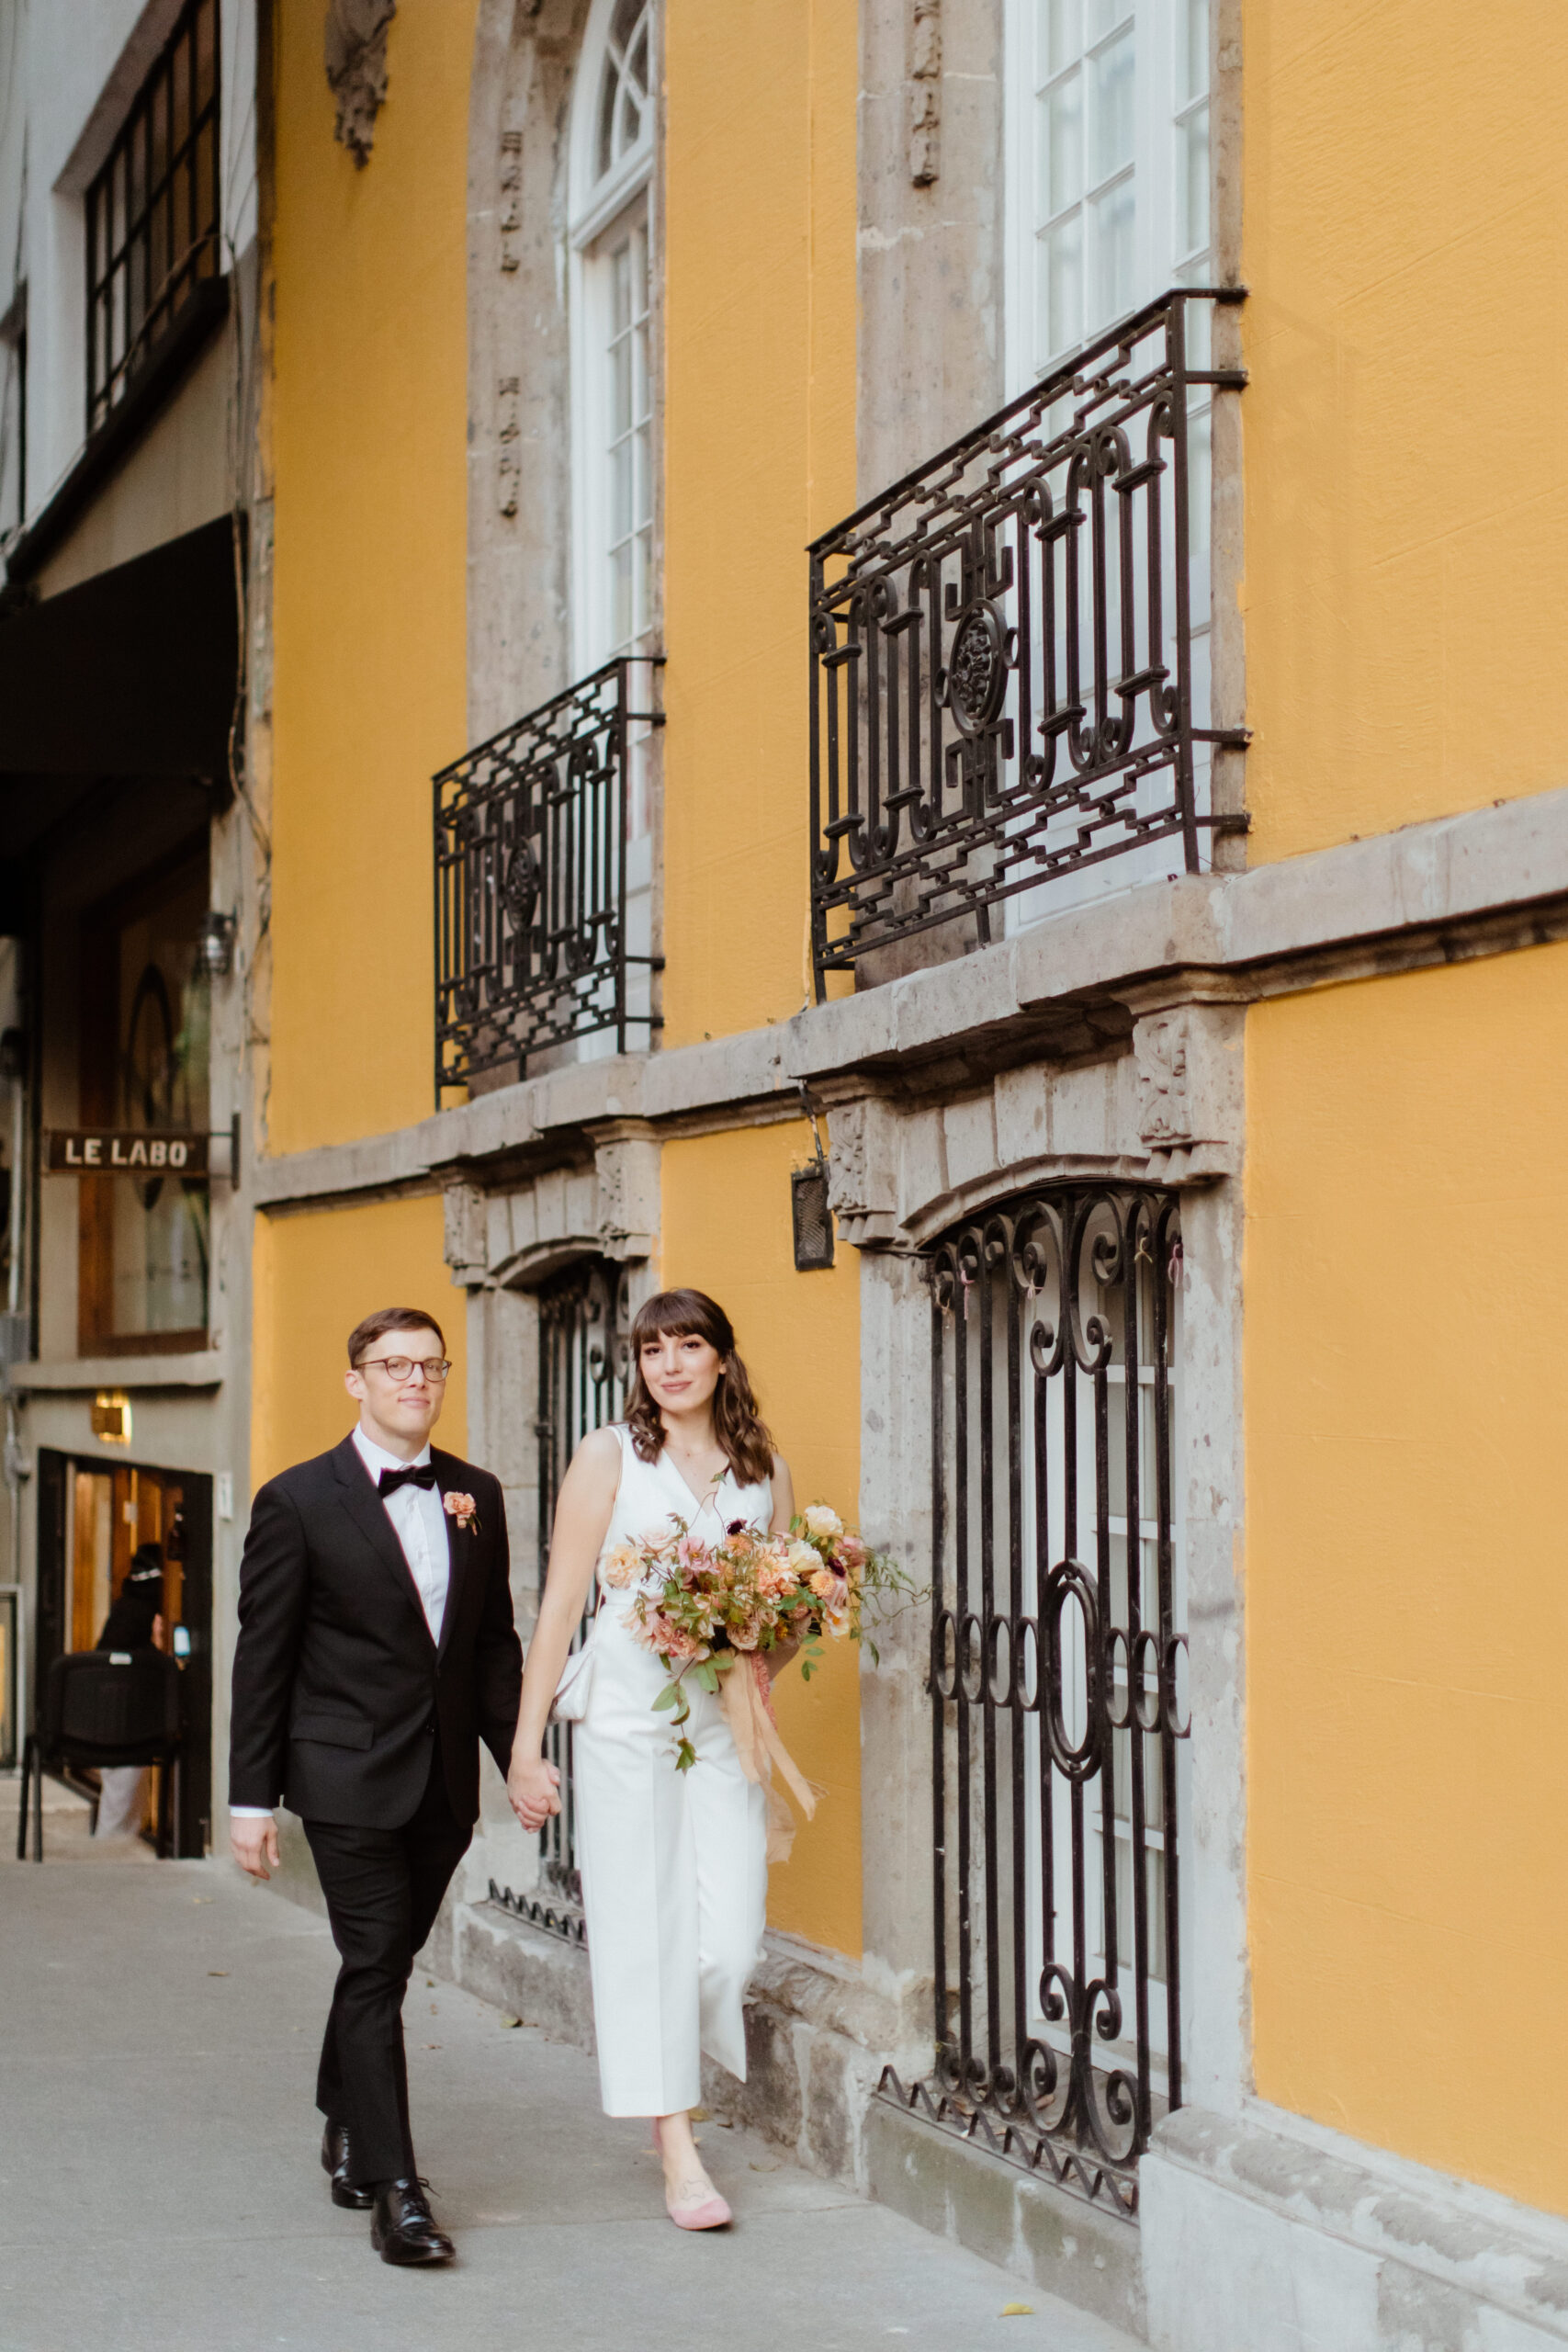 Stunning bride and groom pose together in the city